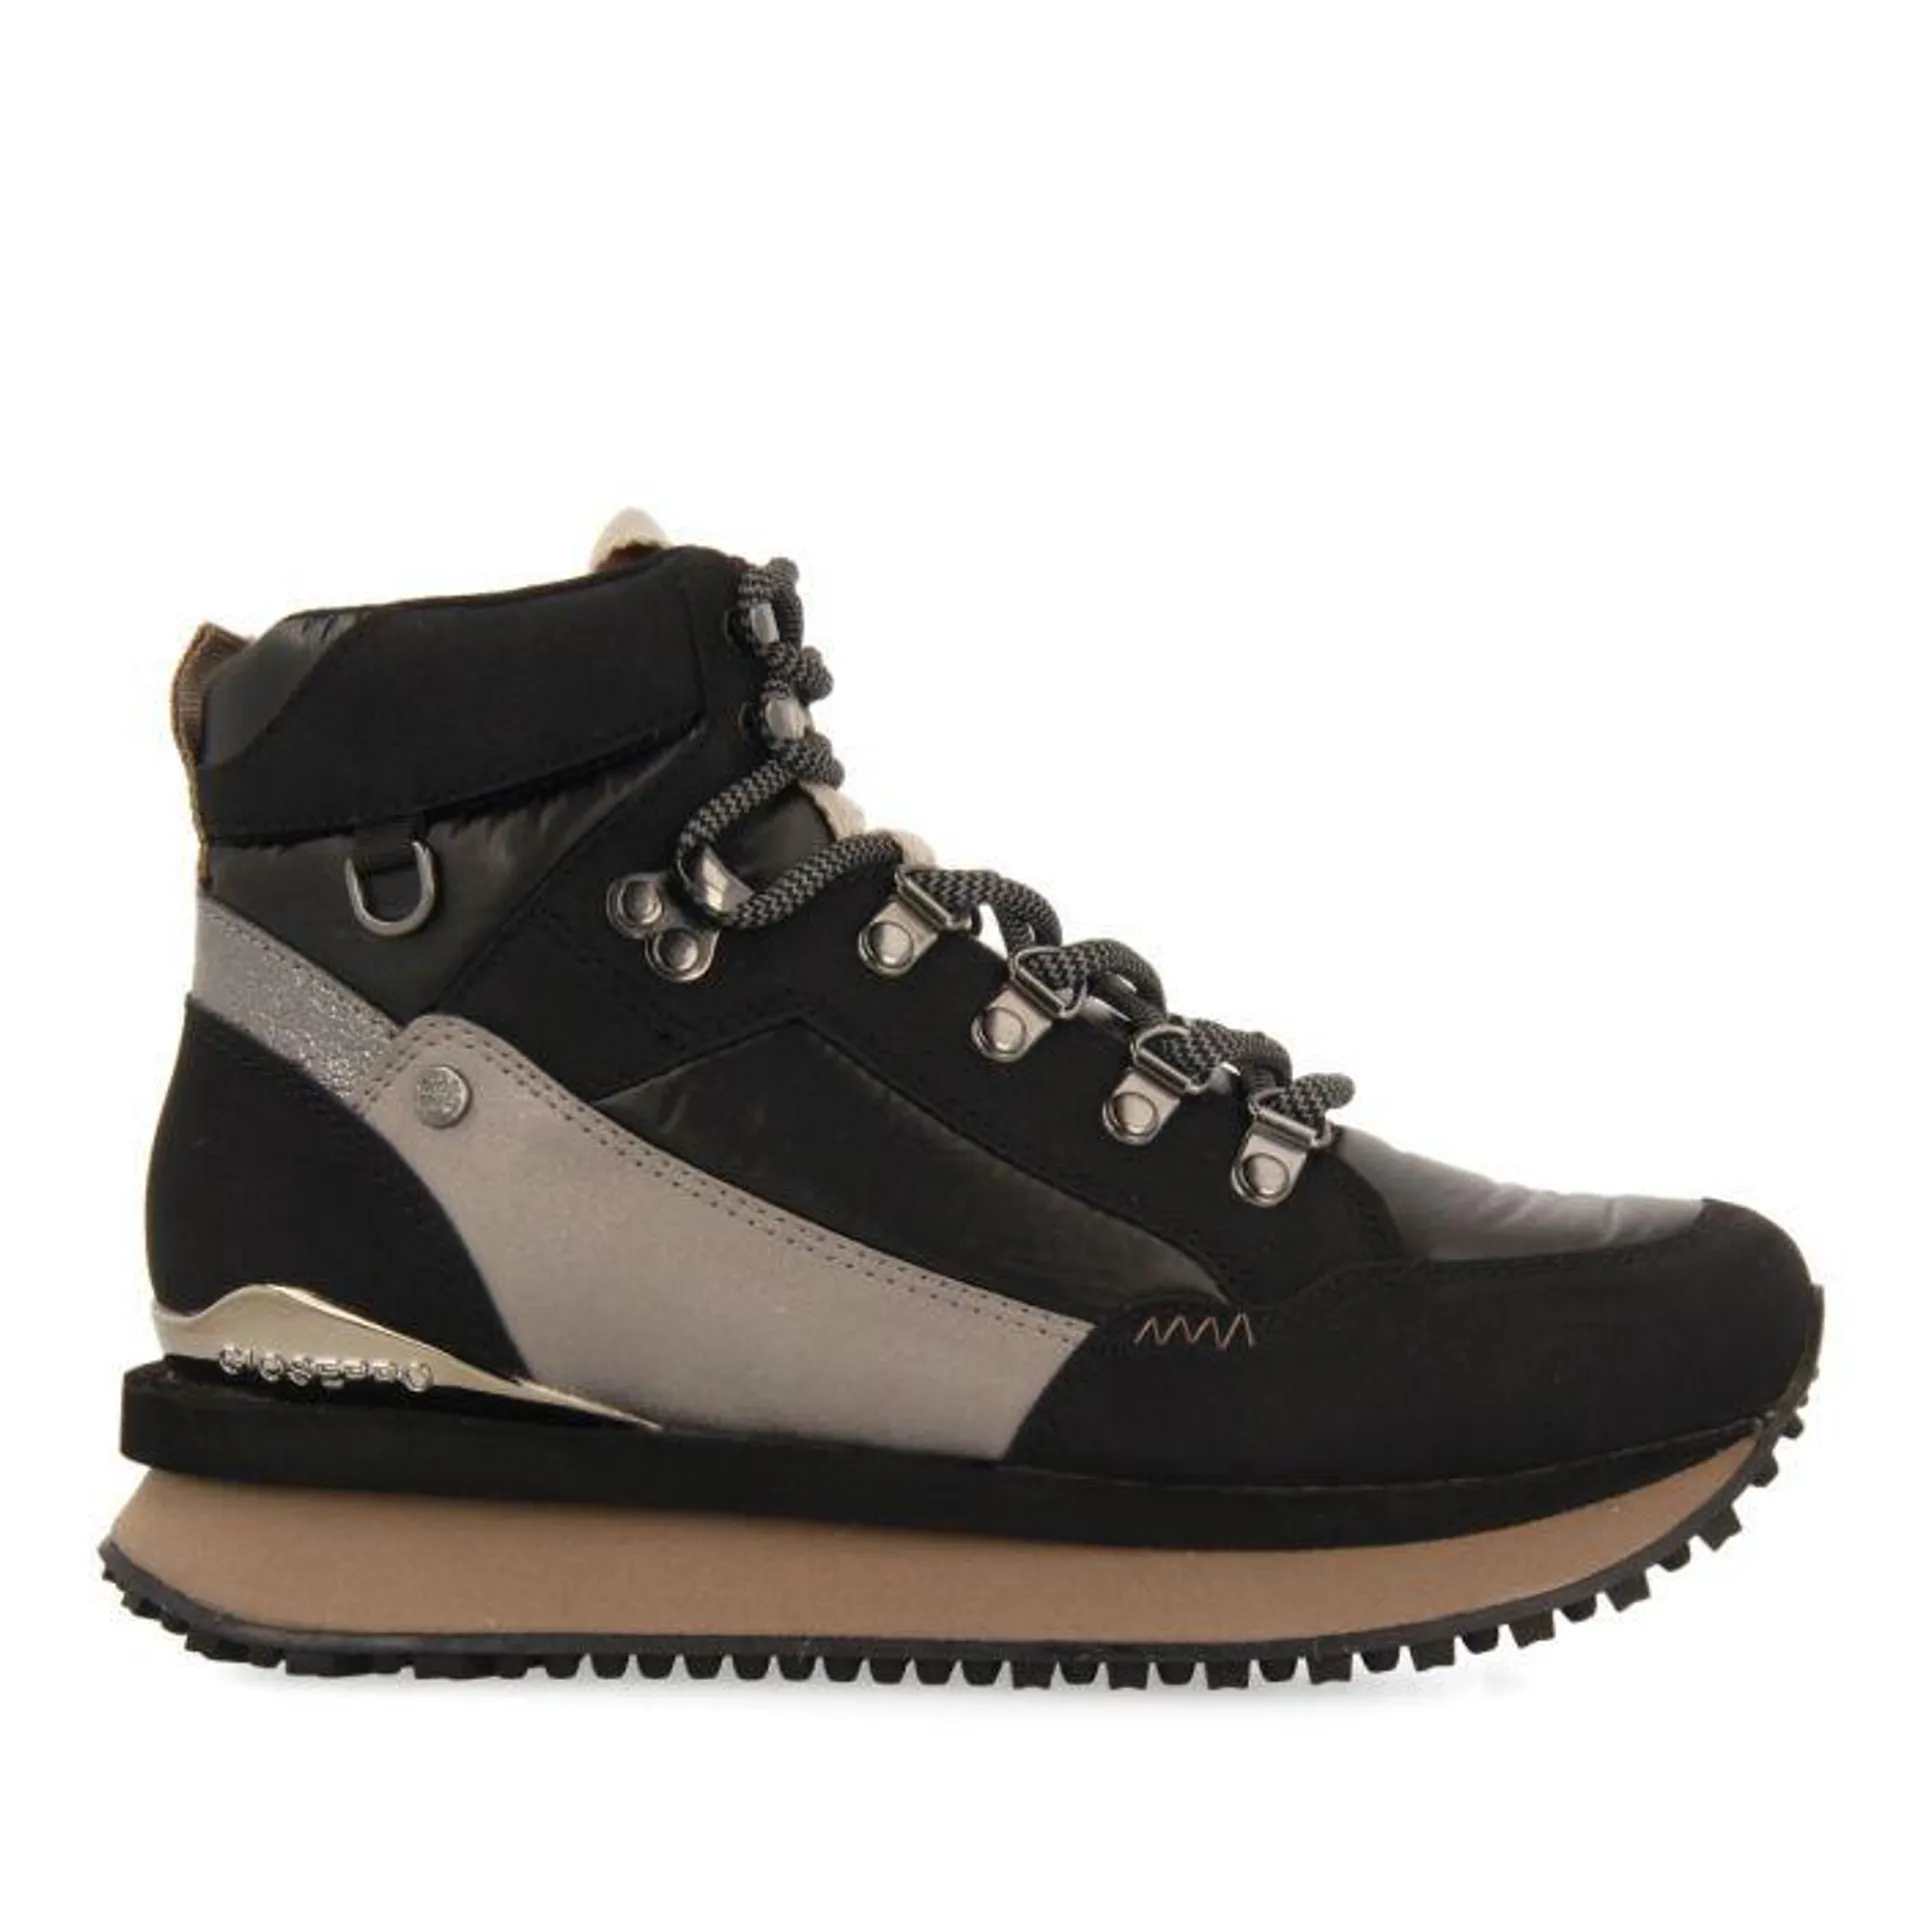 Ferney women's black mountain boot-style sneakers with details